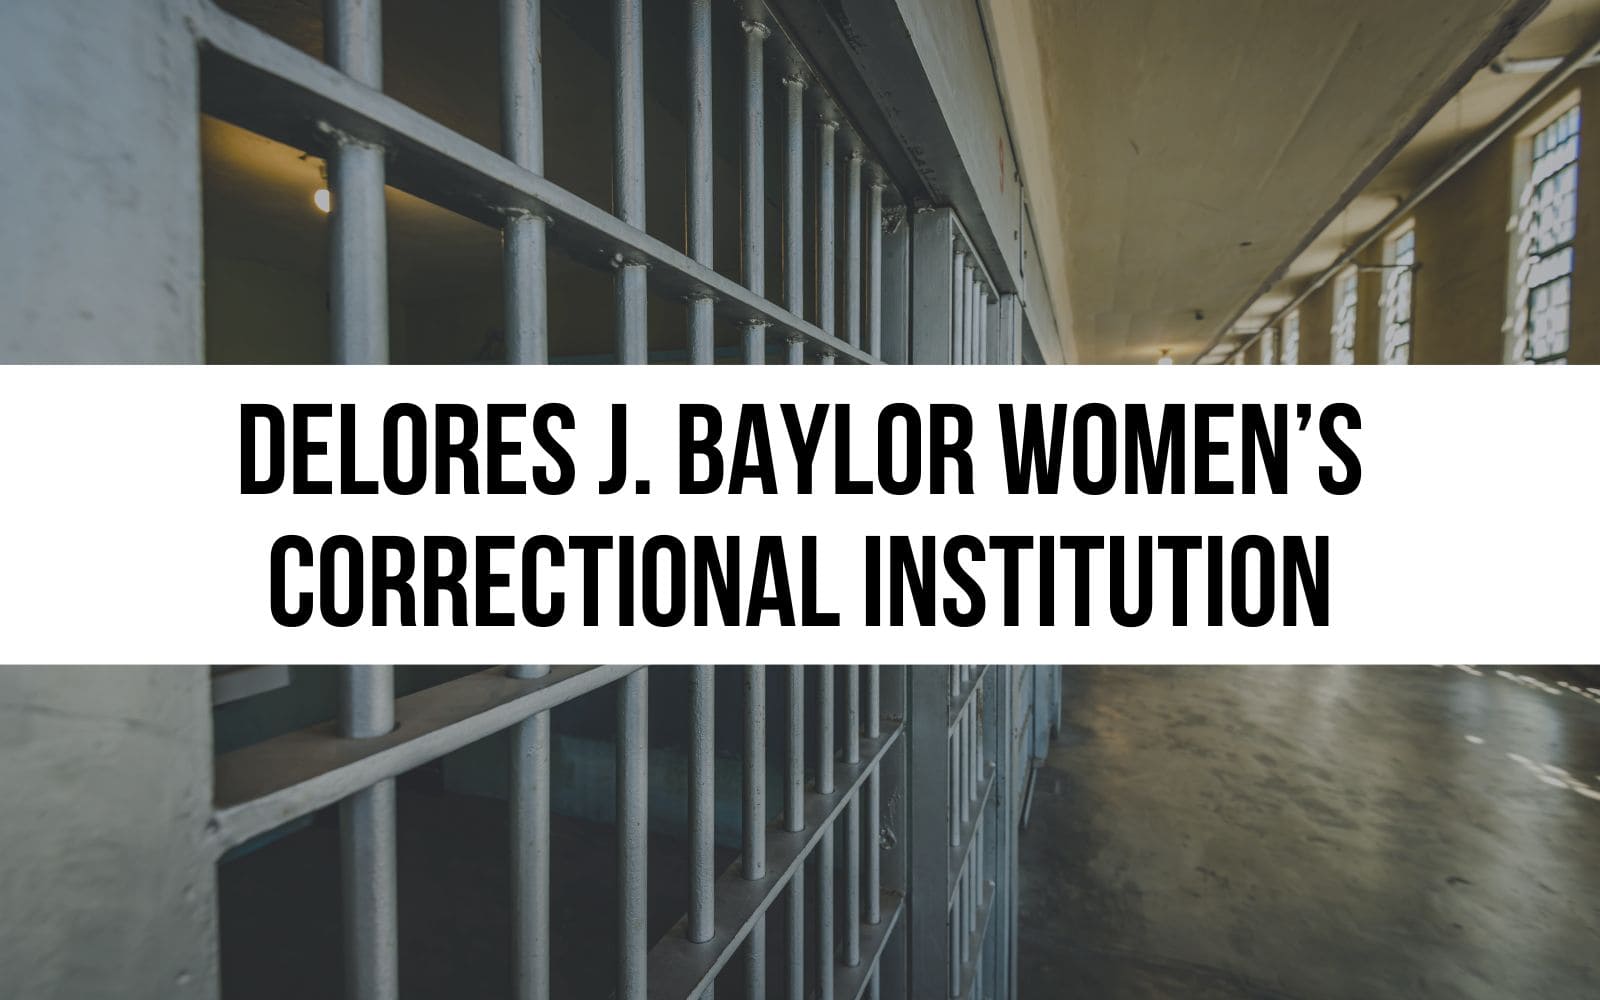 Delores J. Baylor Women’s Correctional Institution